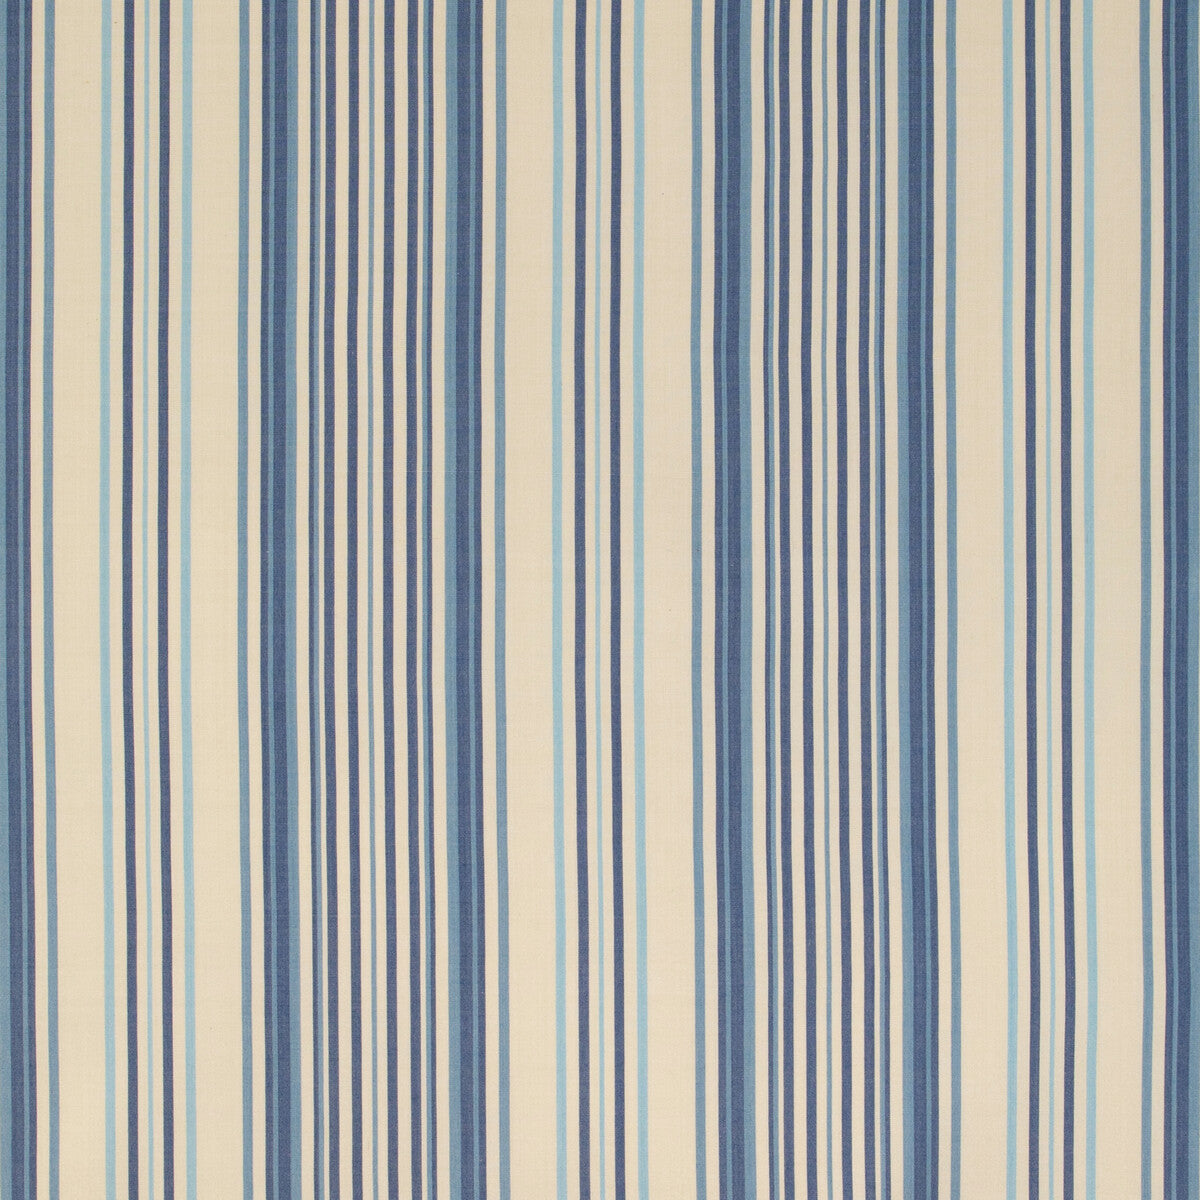 Upland Stripe fabric in sky color - pattern 2023104.1615.0 - by Lee Jofa in the Highfield Stripes And Plaids collection